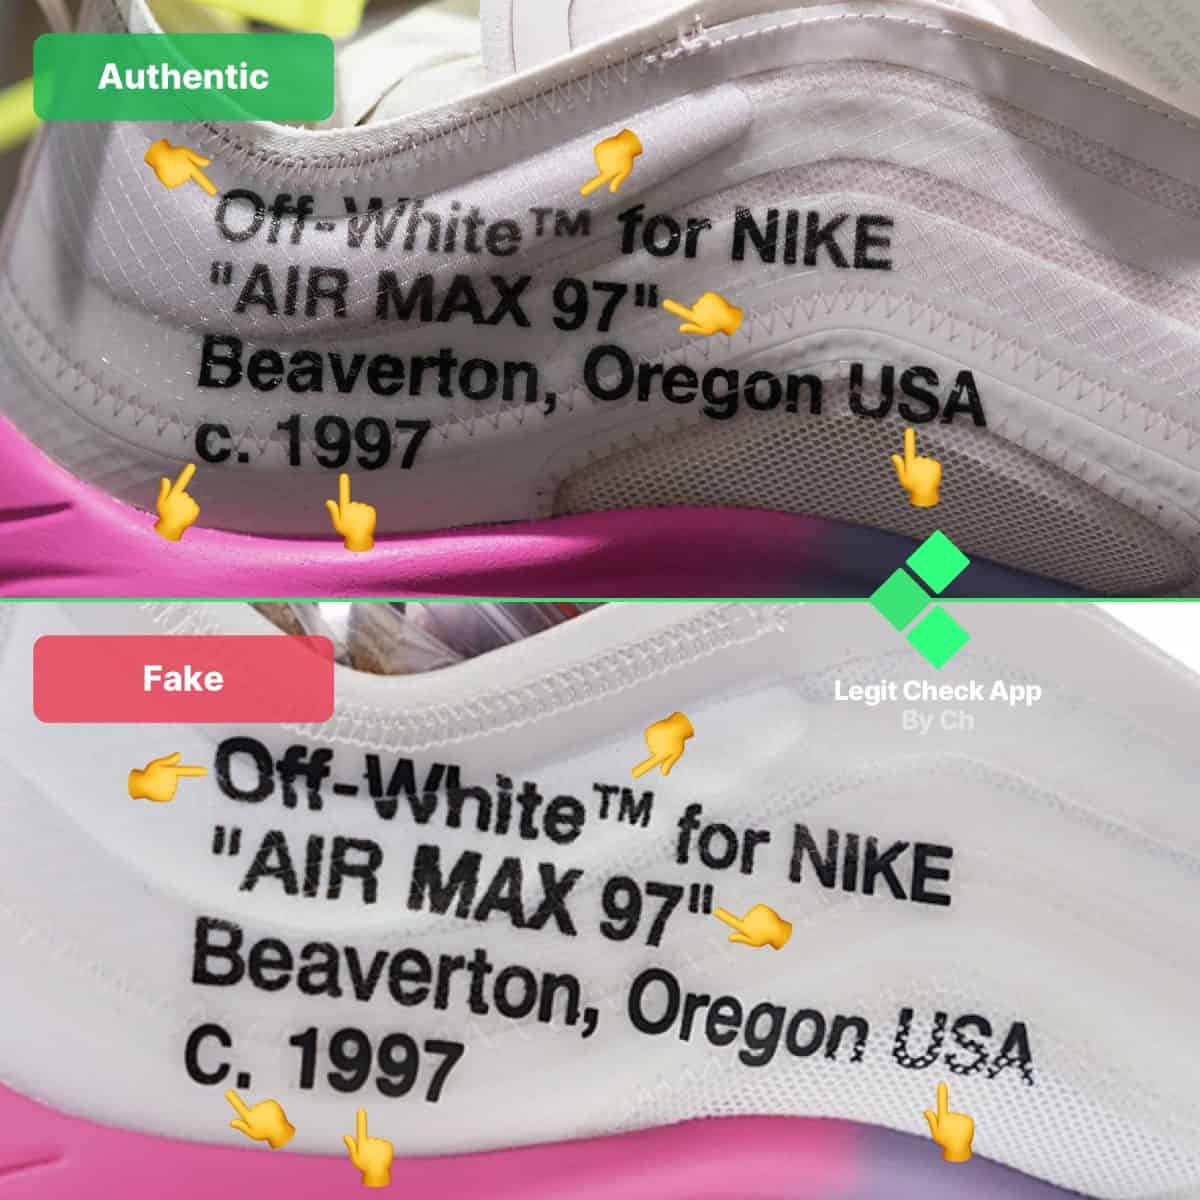 how to tell fake off-white air max 97 serena williams